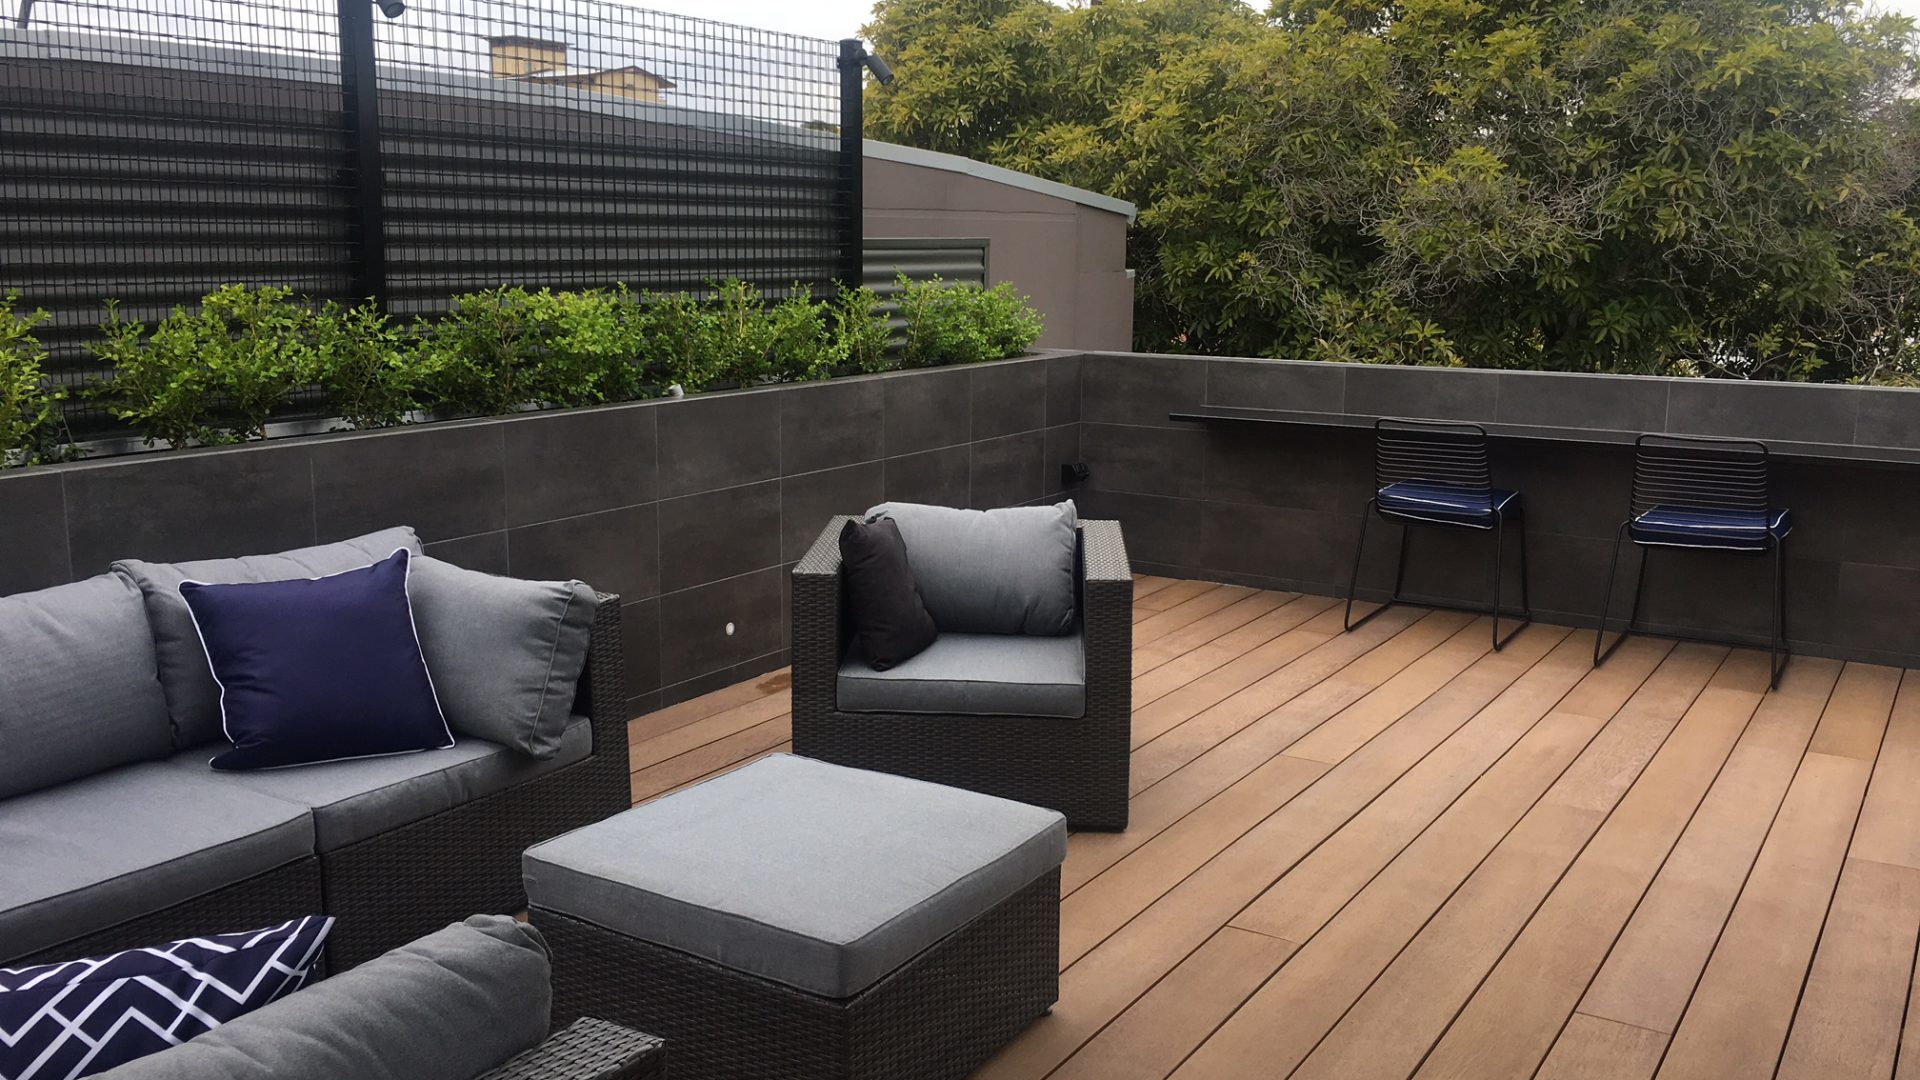 Creative-Outdoors-Millboard-Decking-in-Coppered-Oak-North-Adelaide-1